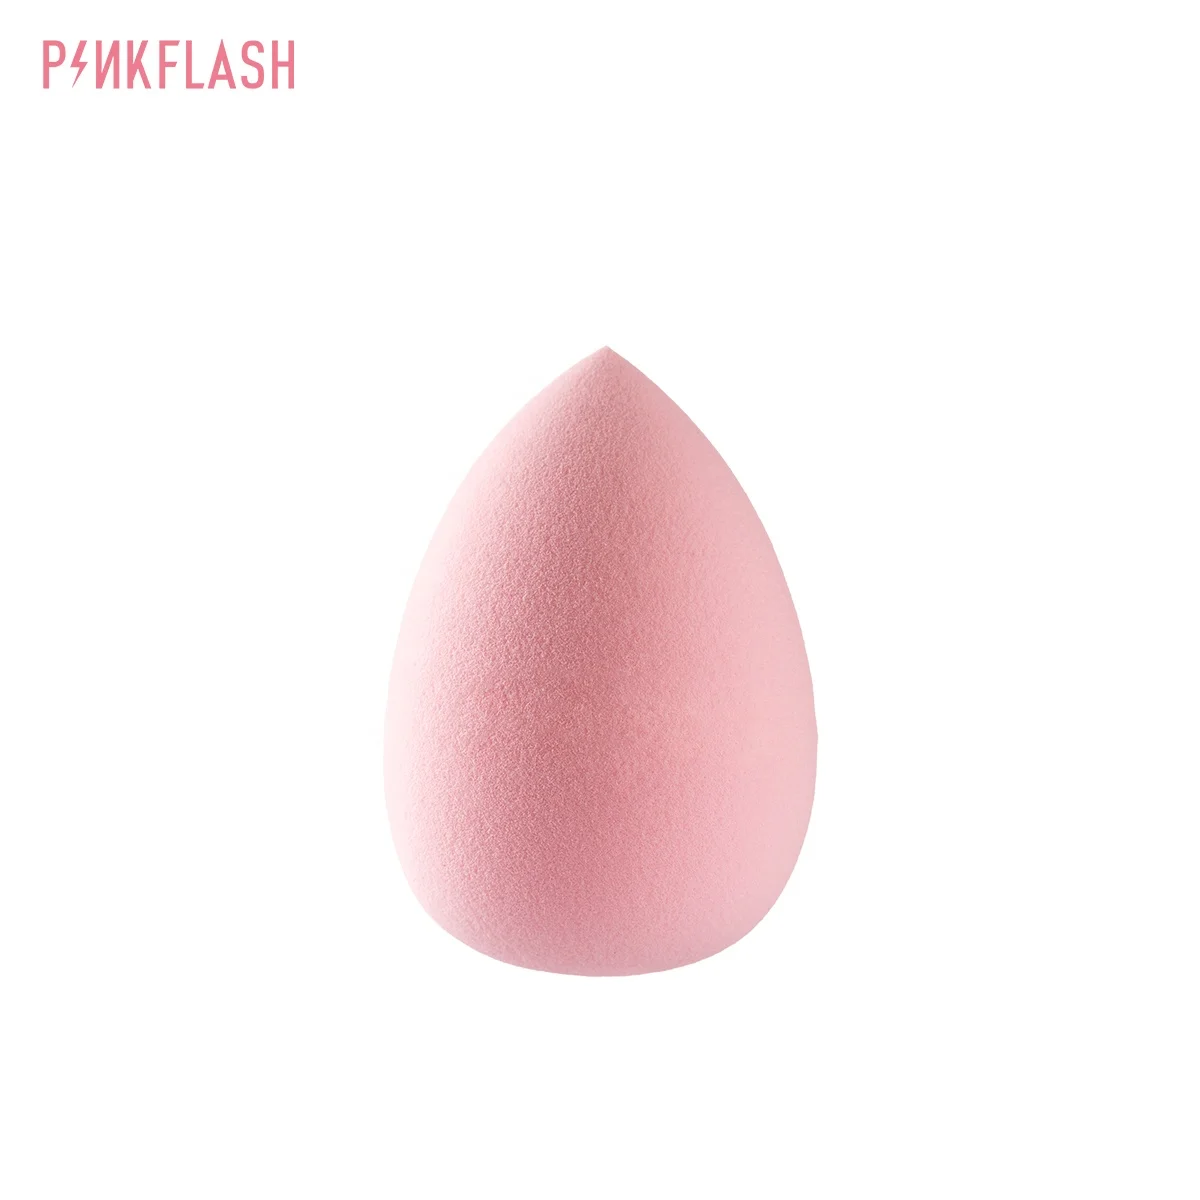 

PINKFLASH Cosmetic Sponge 100% Natural Latex Free Makeup Sponge Puff Smooth Beauty Blend Spong Make Up Tool, 1 color for choose